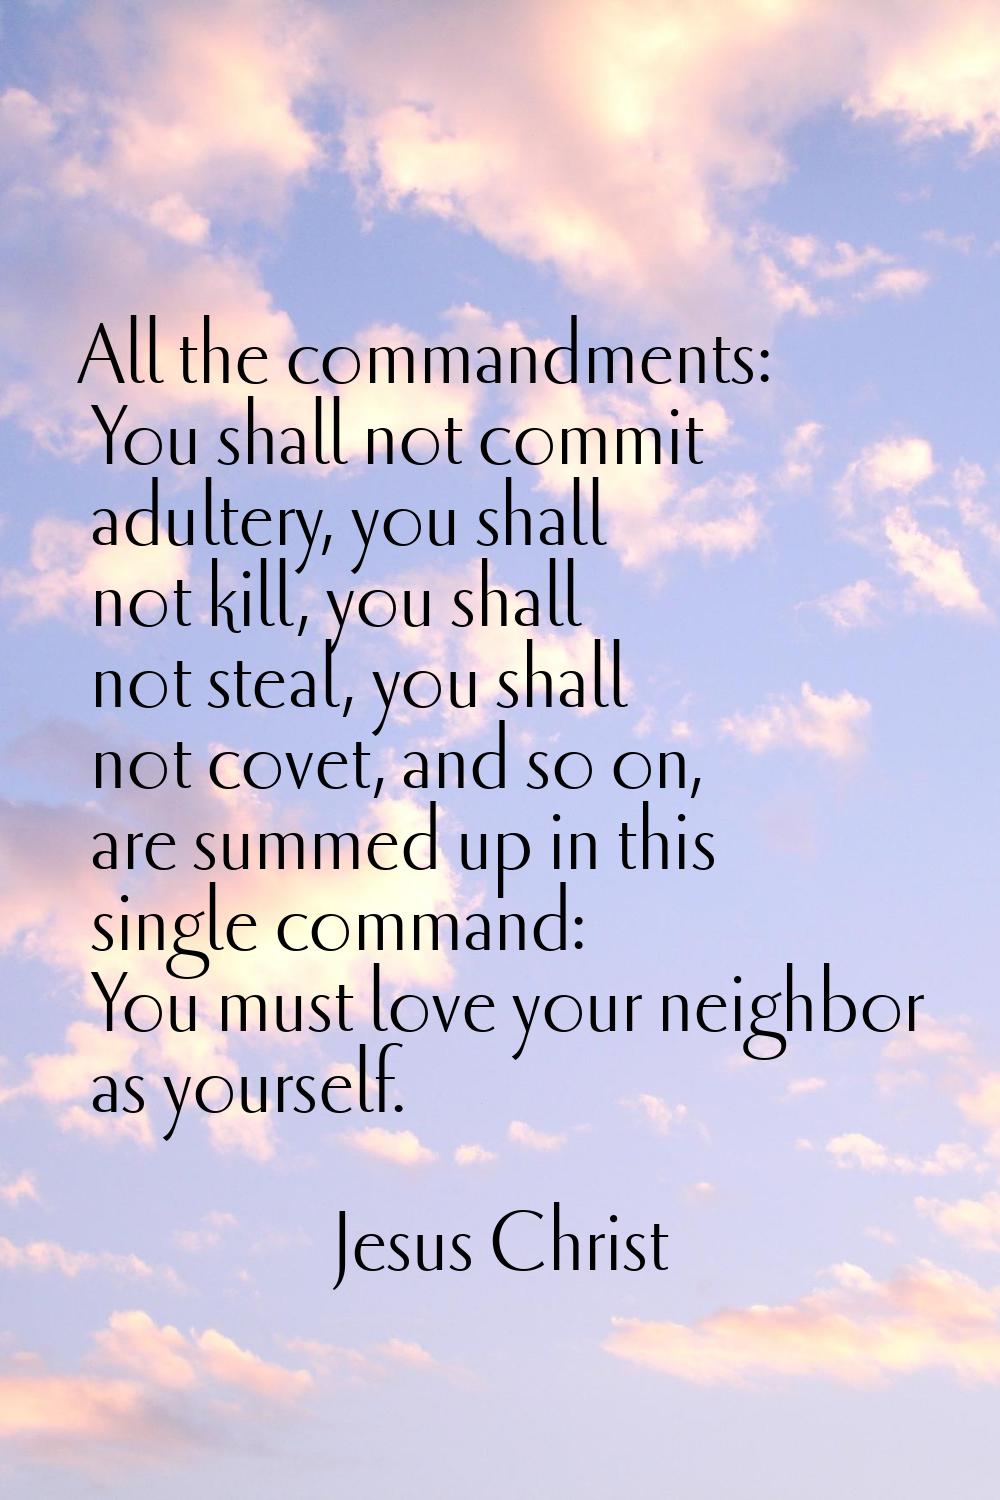 All the commandments: You shall not commit adultery, you shall not kill, you shall not steal, you s